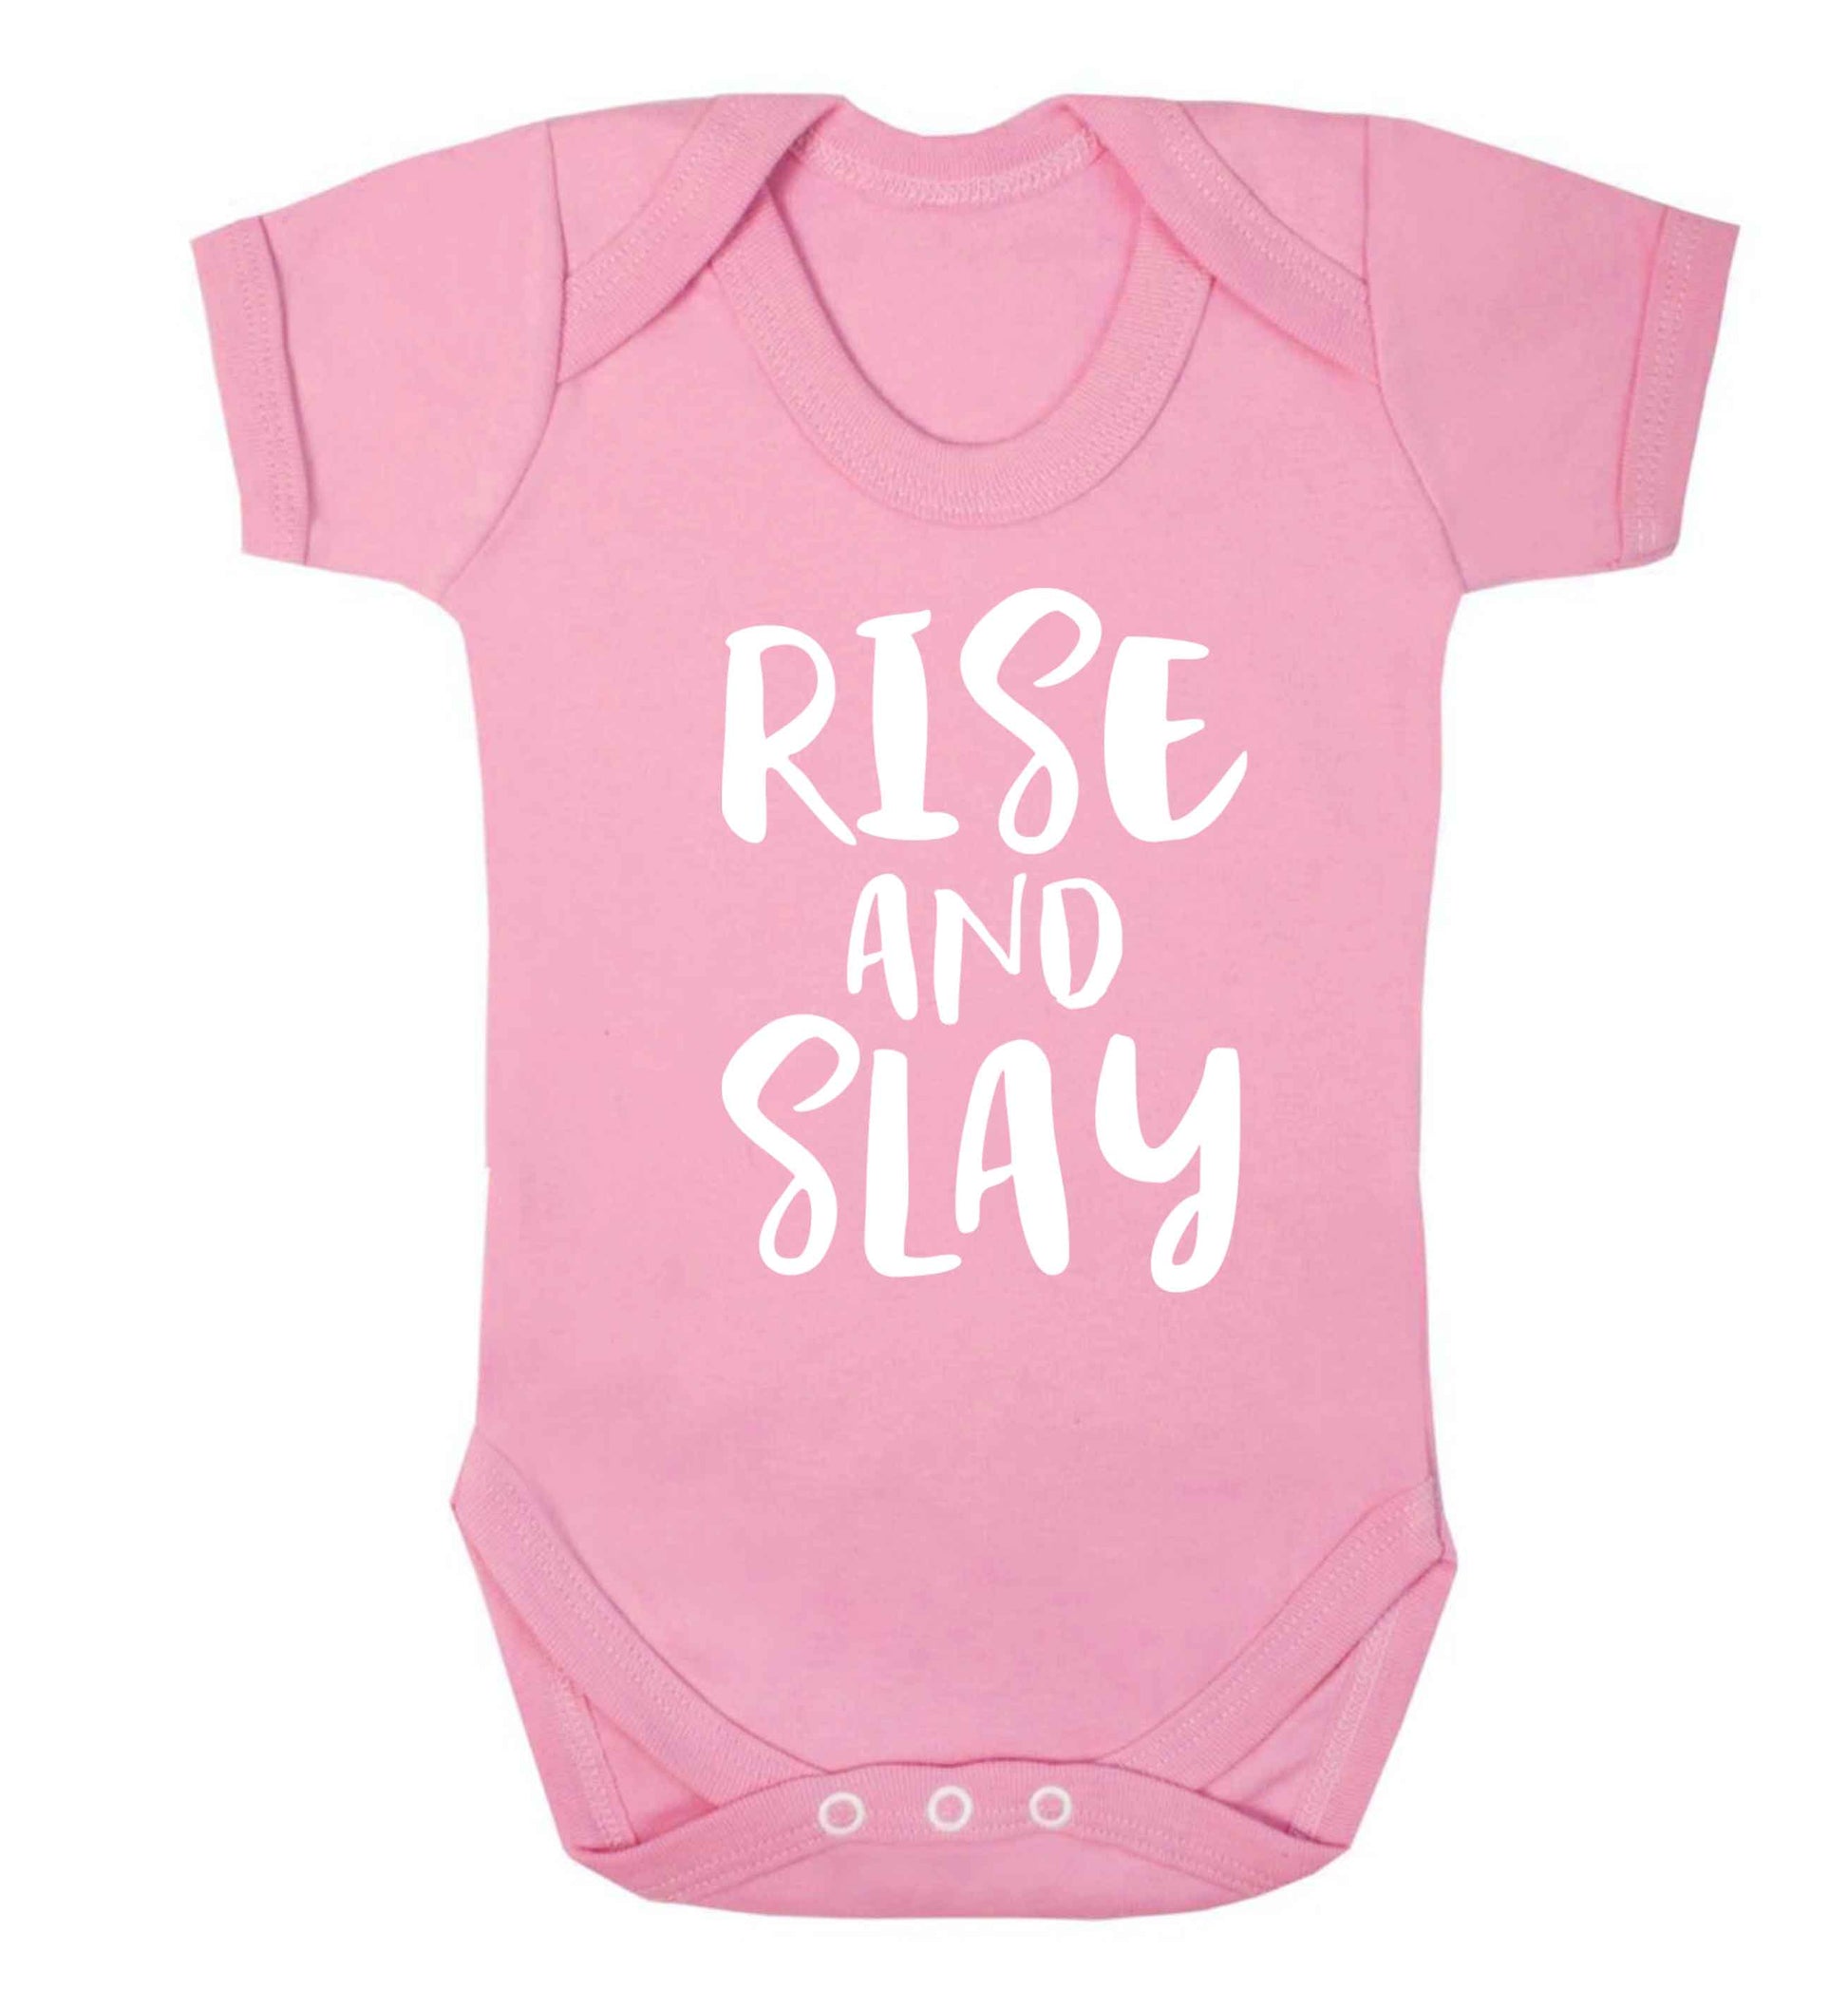 Rise and slay Baby Vest pale pink 18-24 months